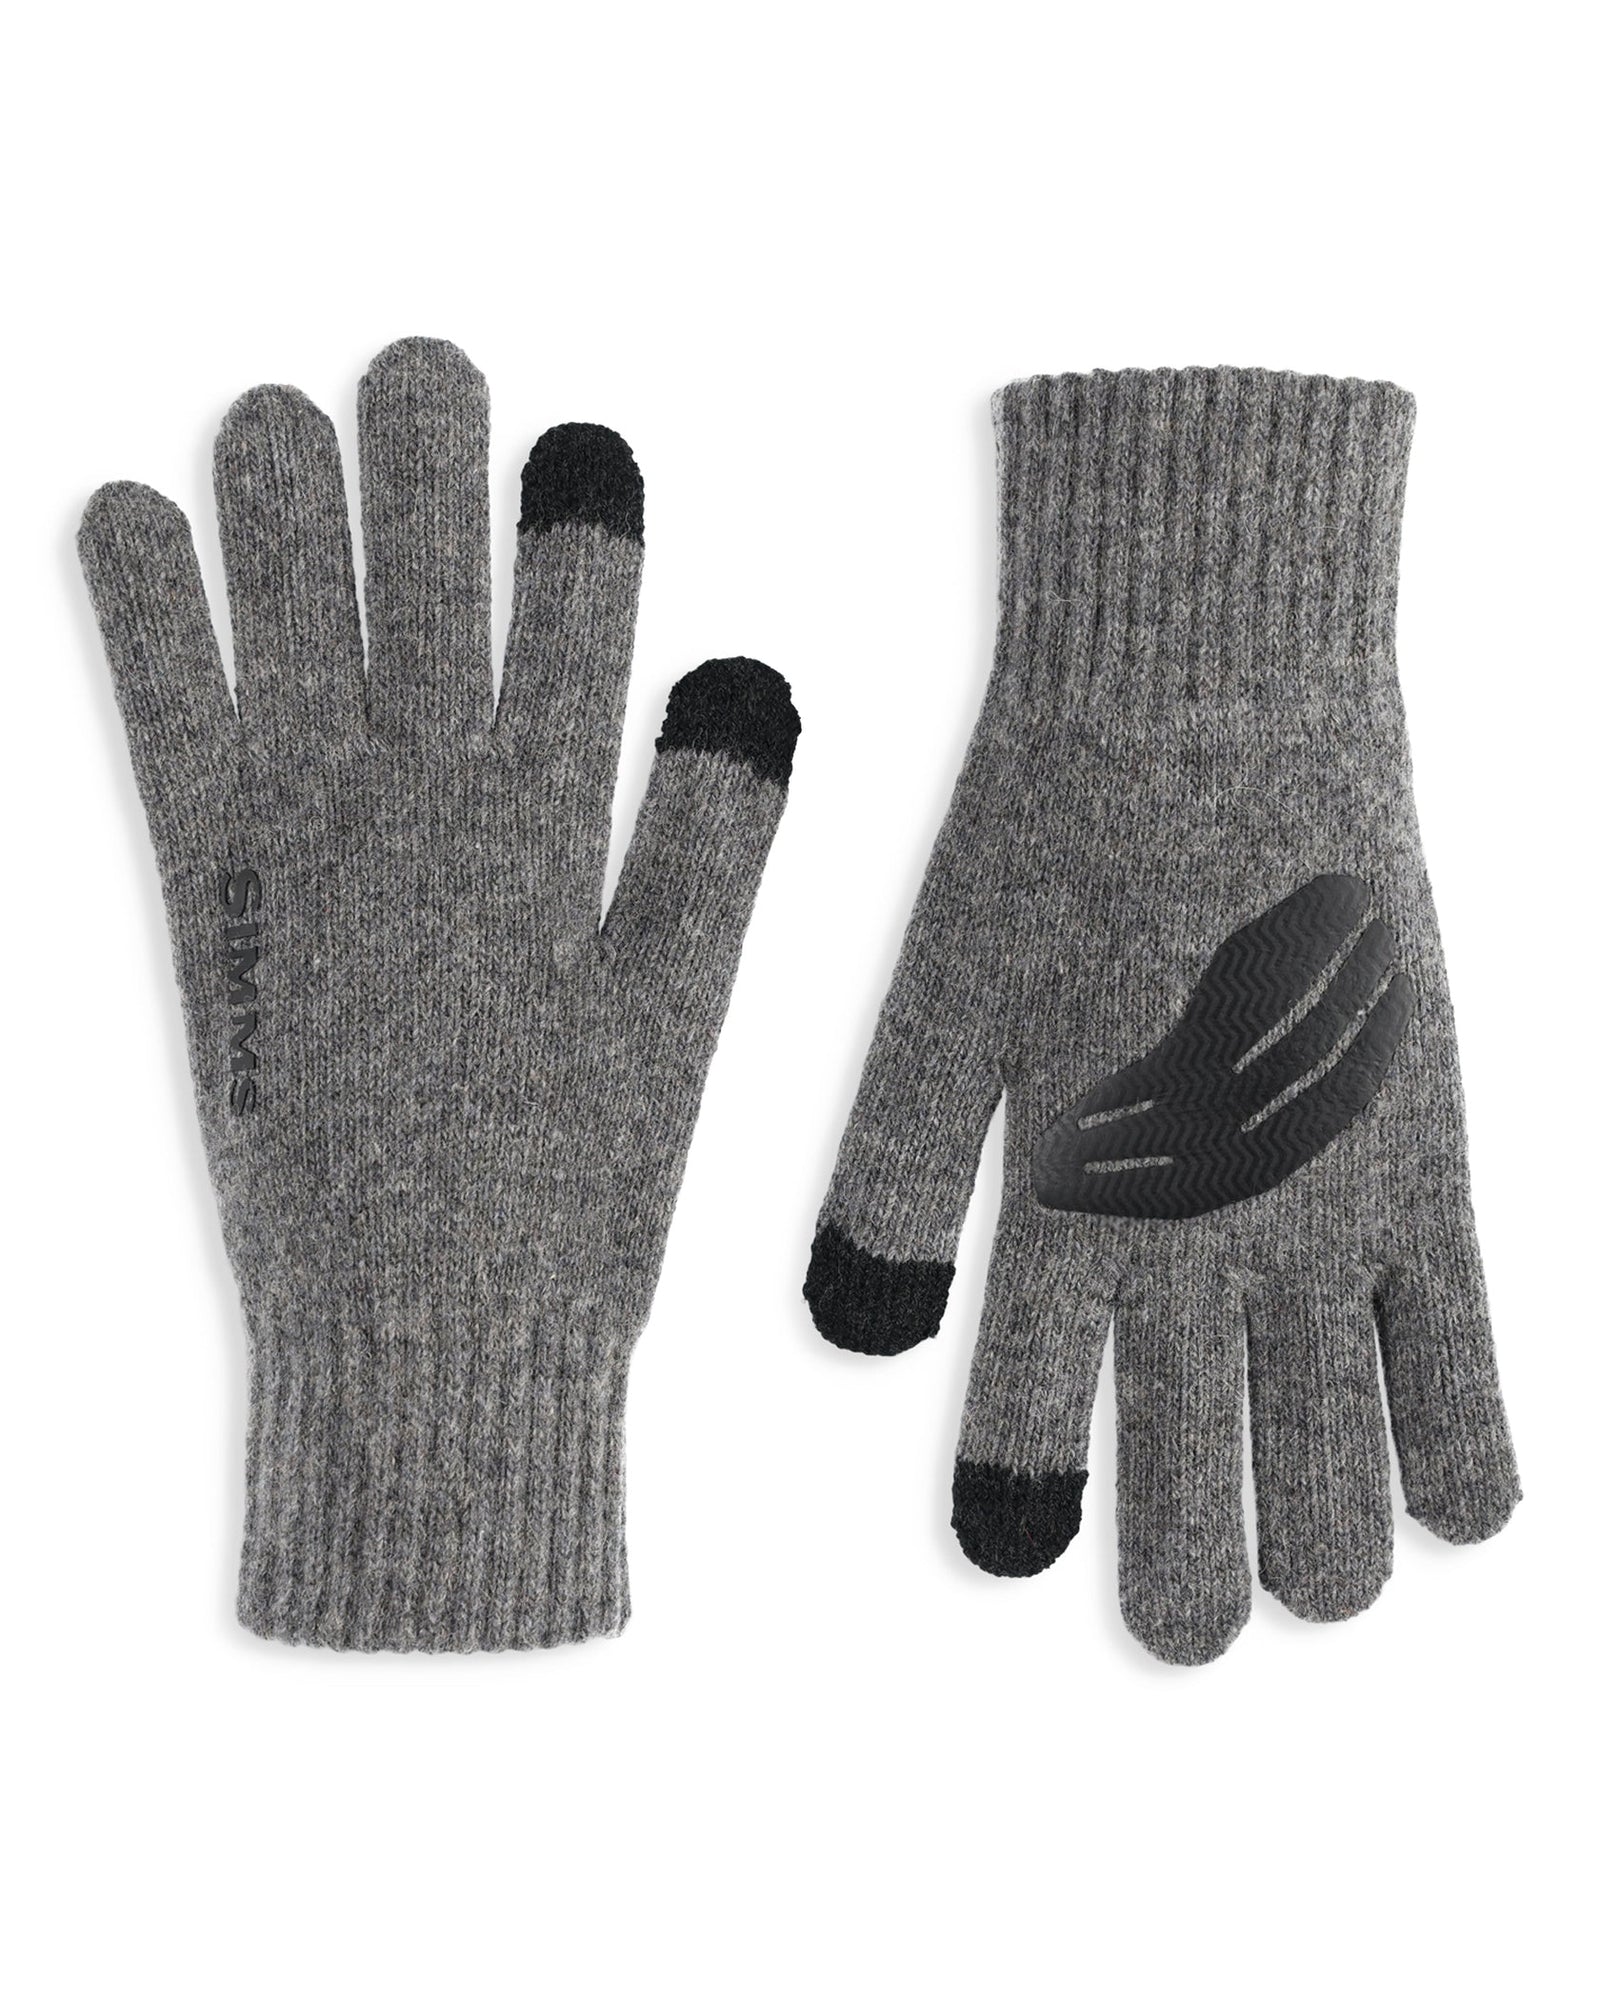 Clam IceArmor Extreme Gloves - LOTWSHQ